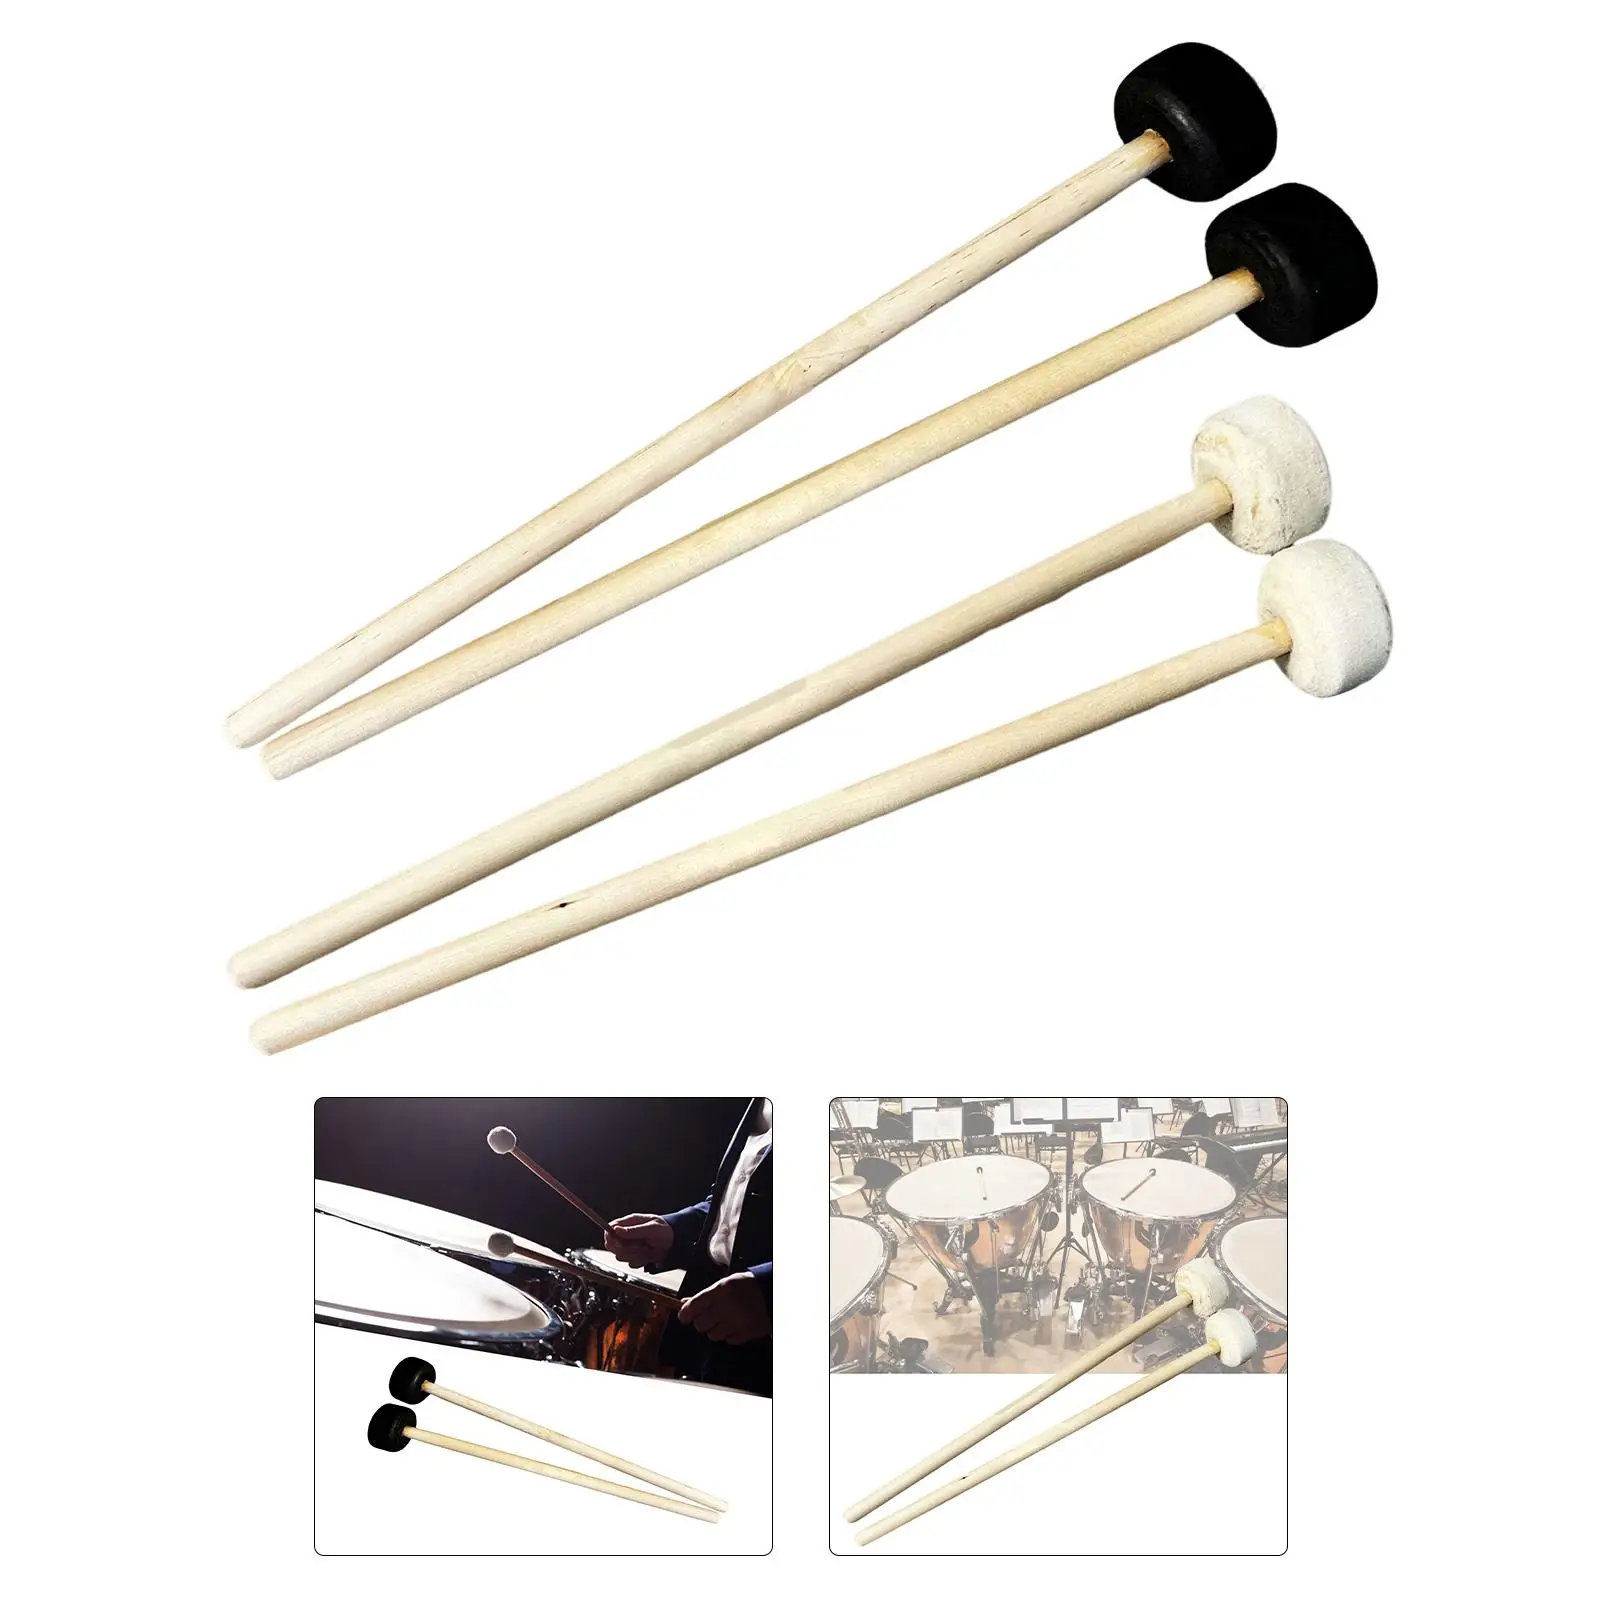 2x Drumsticks Percussion Accessories Wooden Handle Wear Resistant for Drum Music Education Snare Drum Lotus Drum Beginners